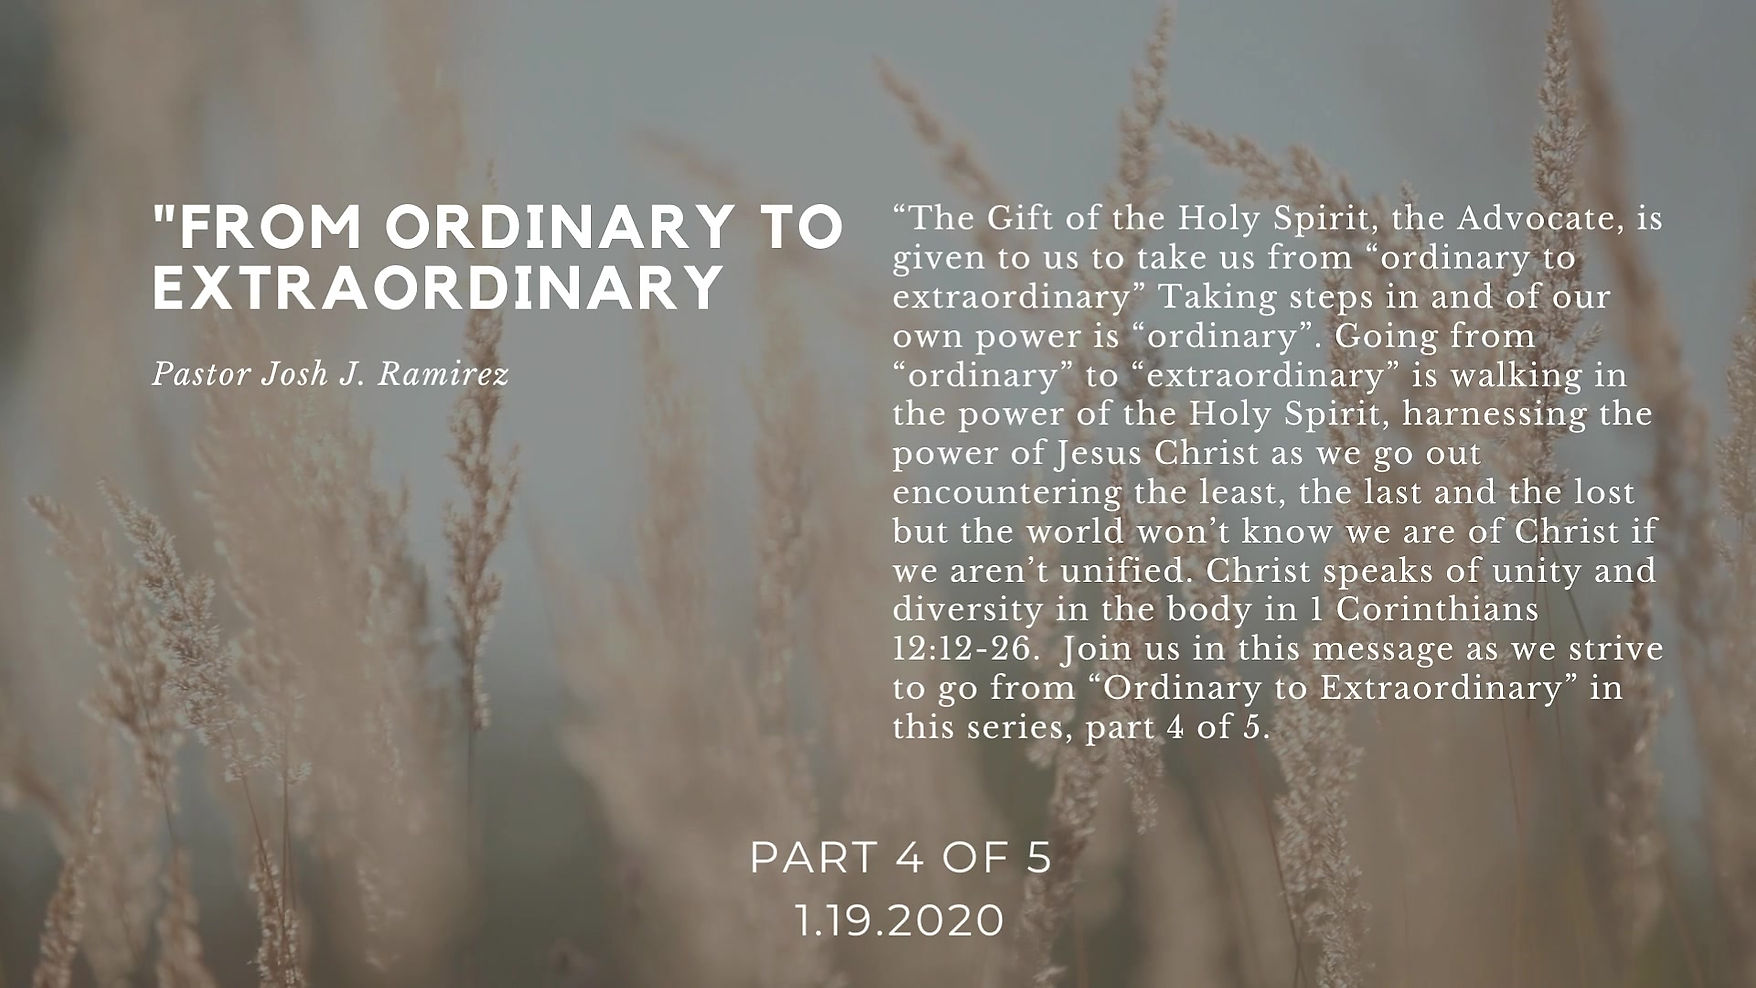 "From Ordinary to Extraordinary" Part 4 of 5